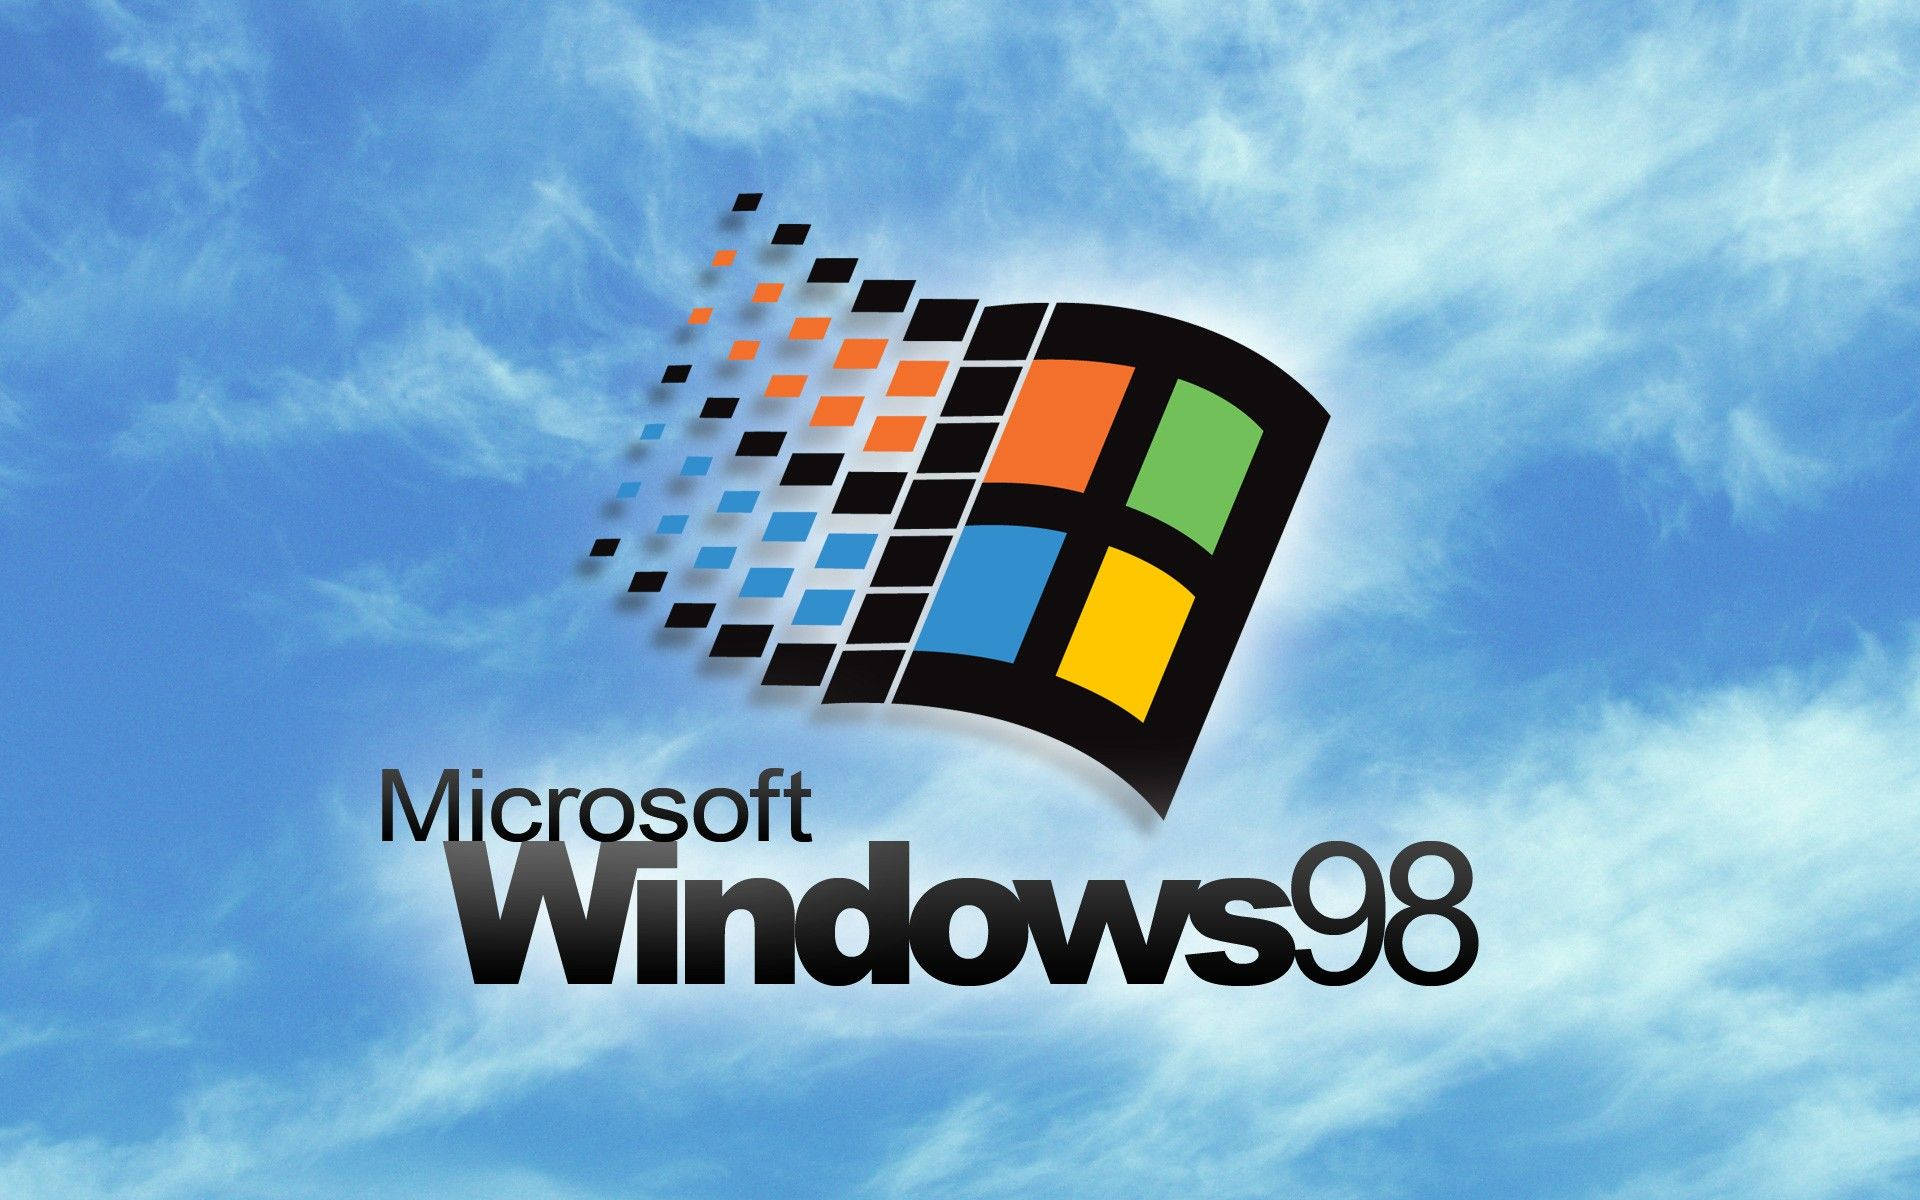 Download Windows 98 And Sky Background Wallpaper